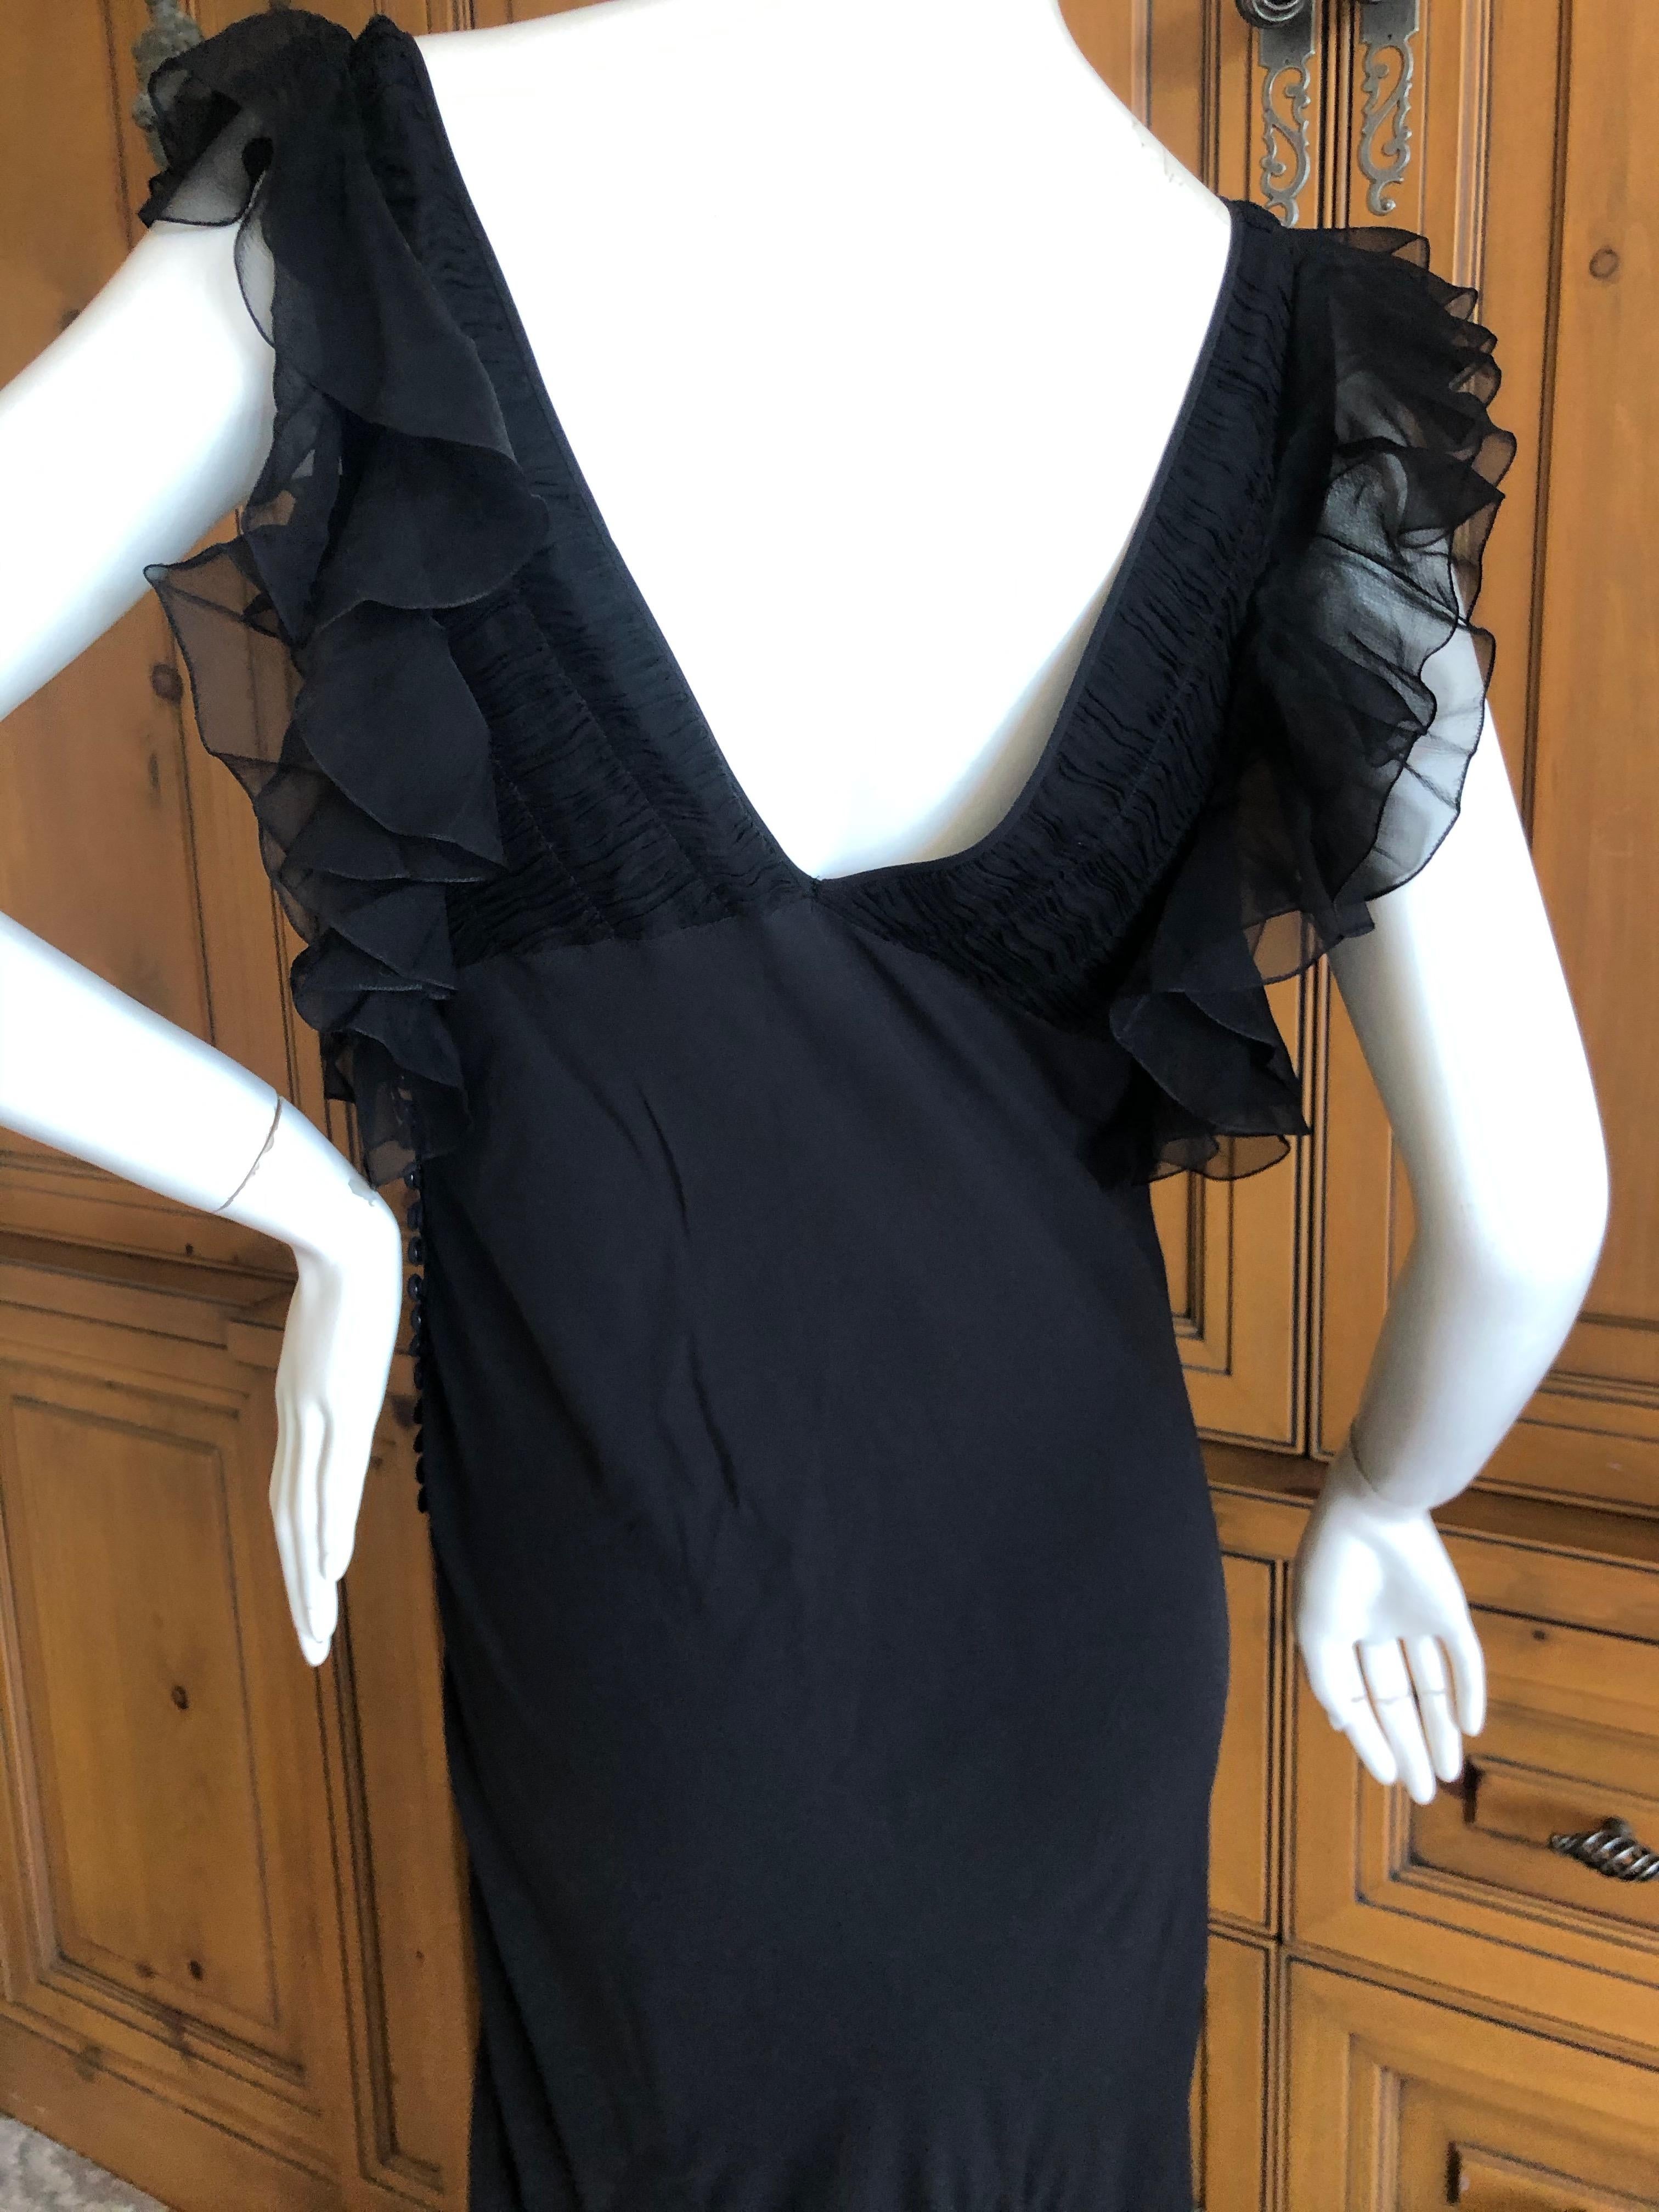 John Galliano Vintage Black Bias Cut Empire Style Evening Dress with Ruffles For Sale 7